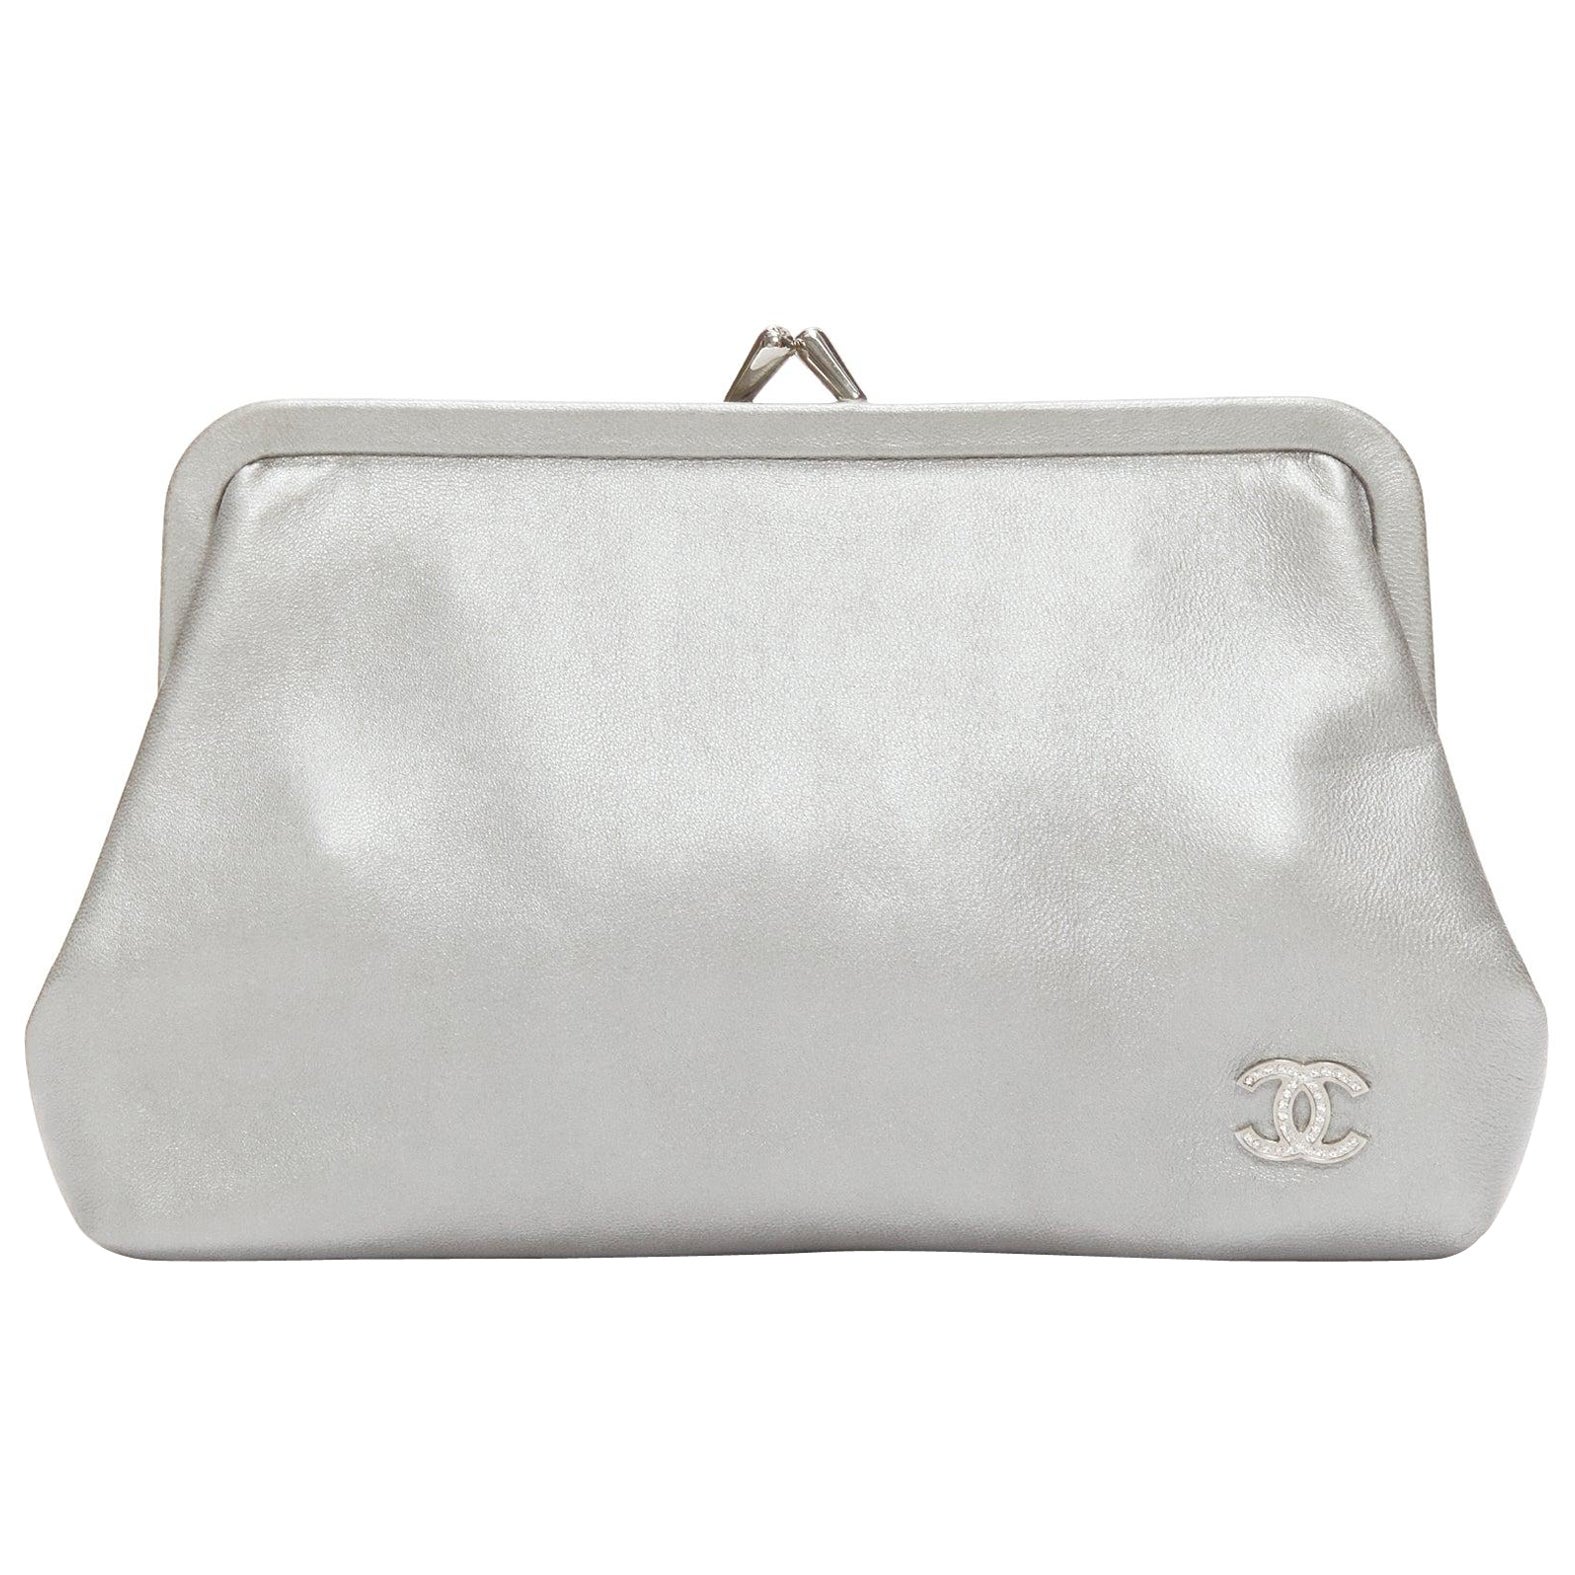 CHANEL grey smooth leather CC crystal logo silver kisslock small pouch